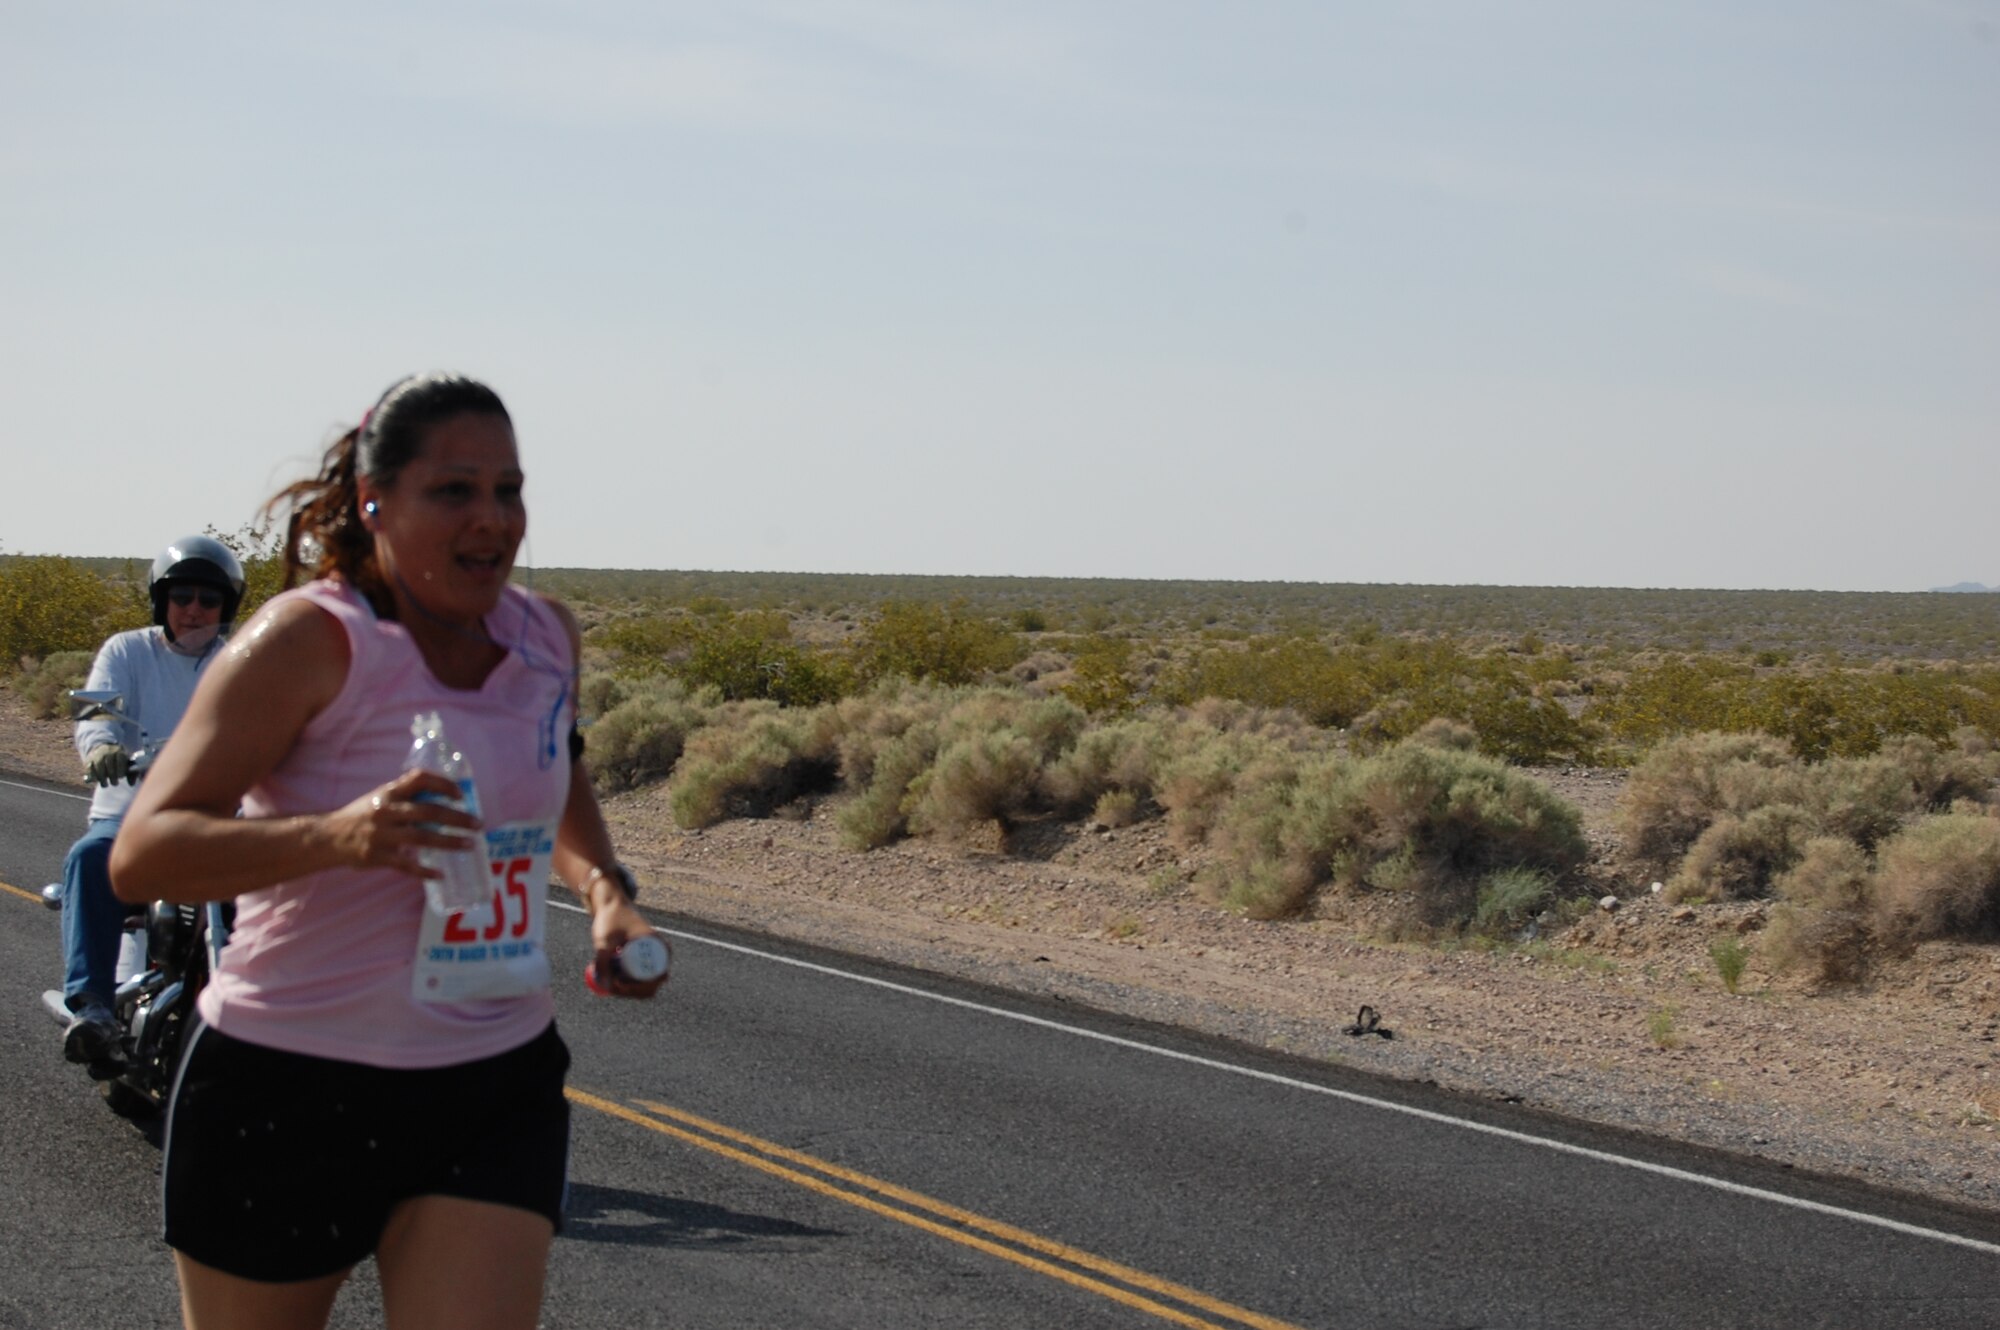 Josie Fonseca, captain of team LAAFB, runs the team's first leg of the 26th Annual "Baker to Vegas" Challenge Cup Relay Race April 17 and 18, 2010. (Courtesy photo)